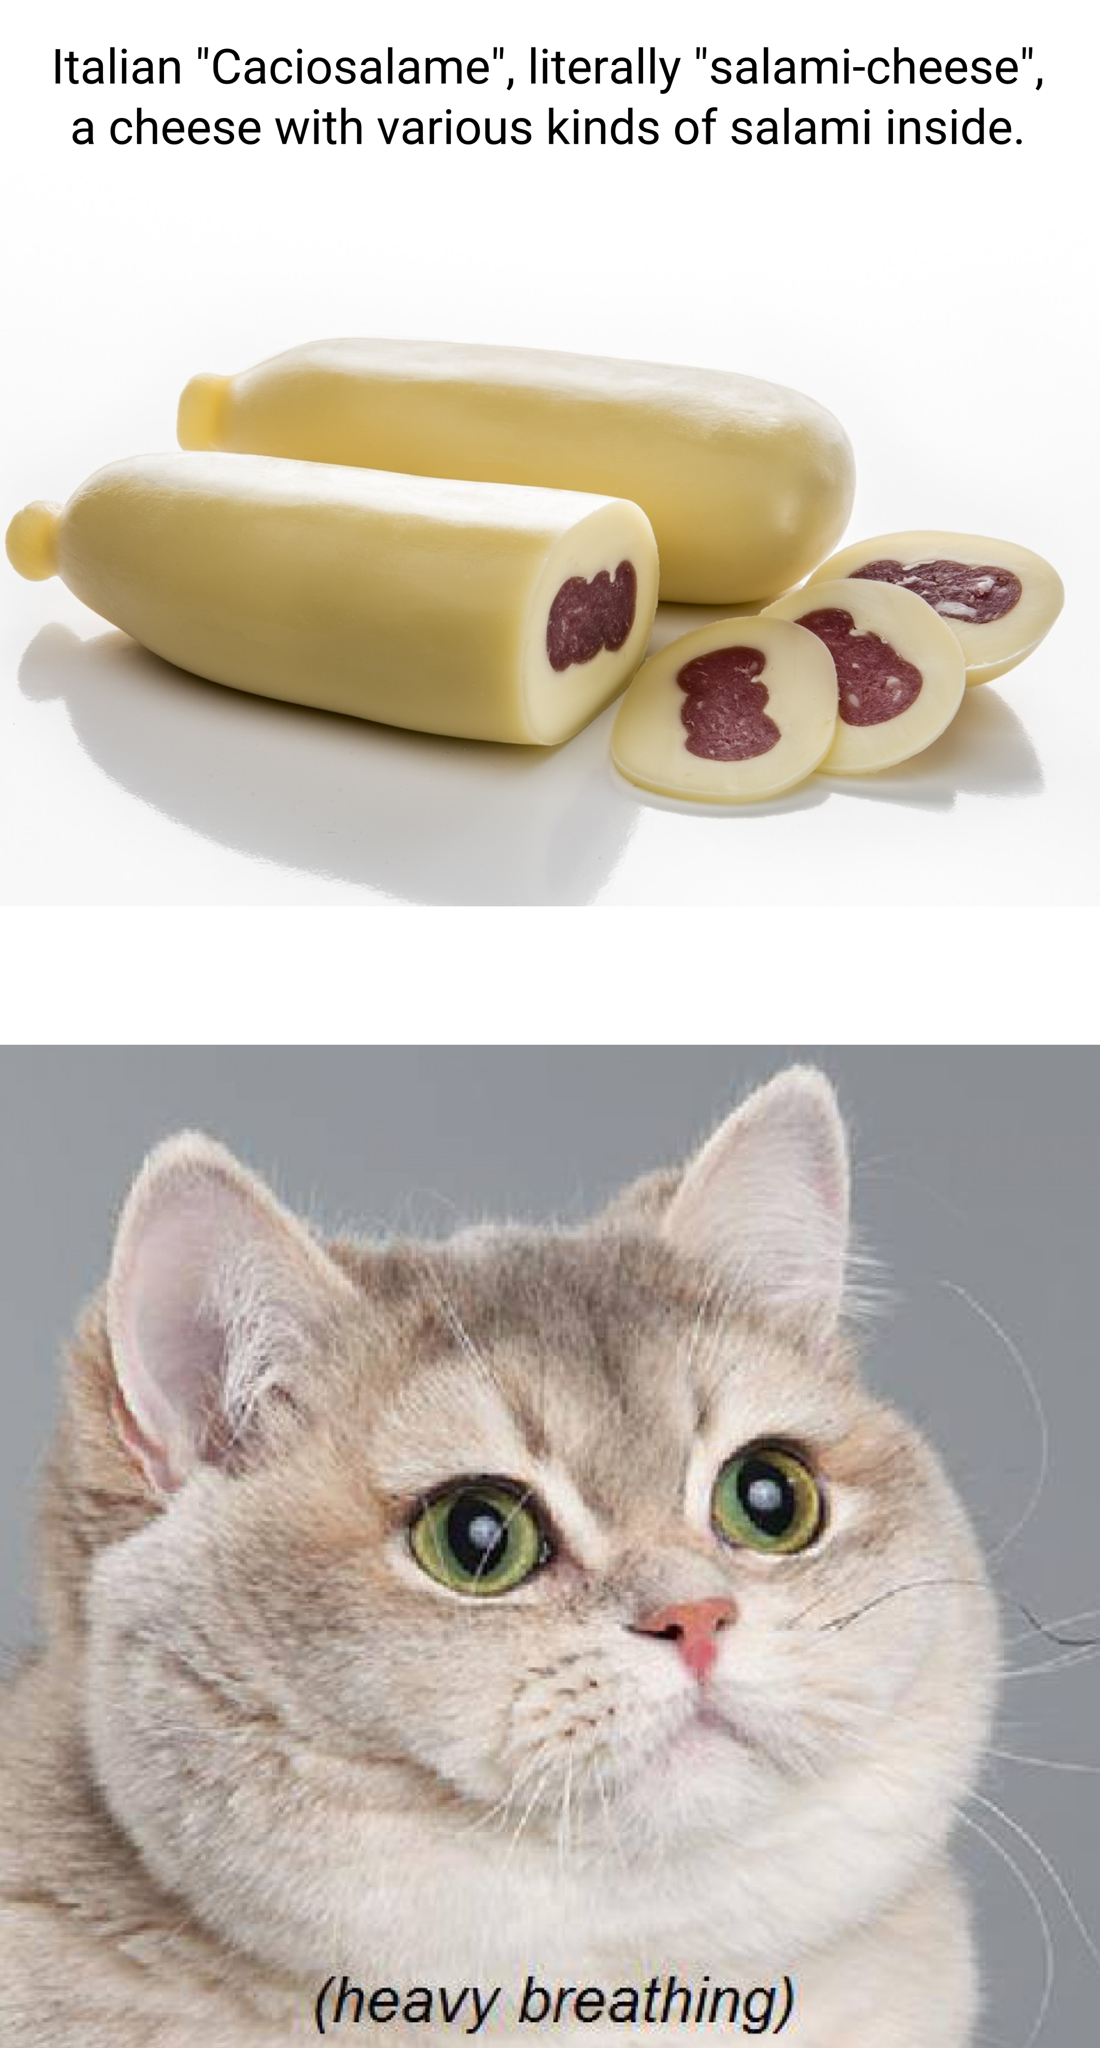 funny memes - dank memes - fat cat heavy breathing meme - Italian "Caciosalame", literally "salamicheese", a cheese with various kinds of salami inside. heavy breathing